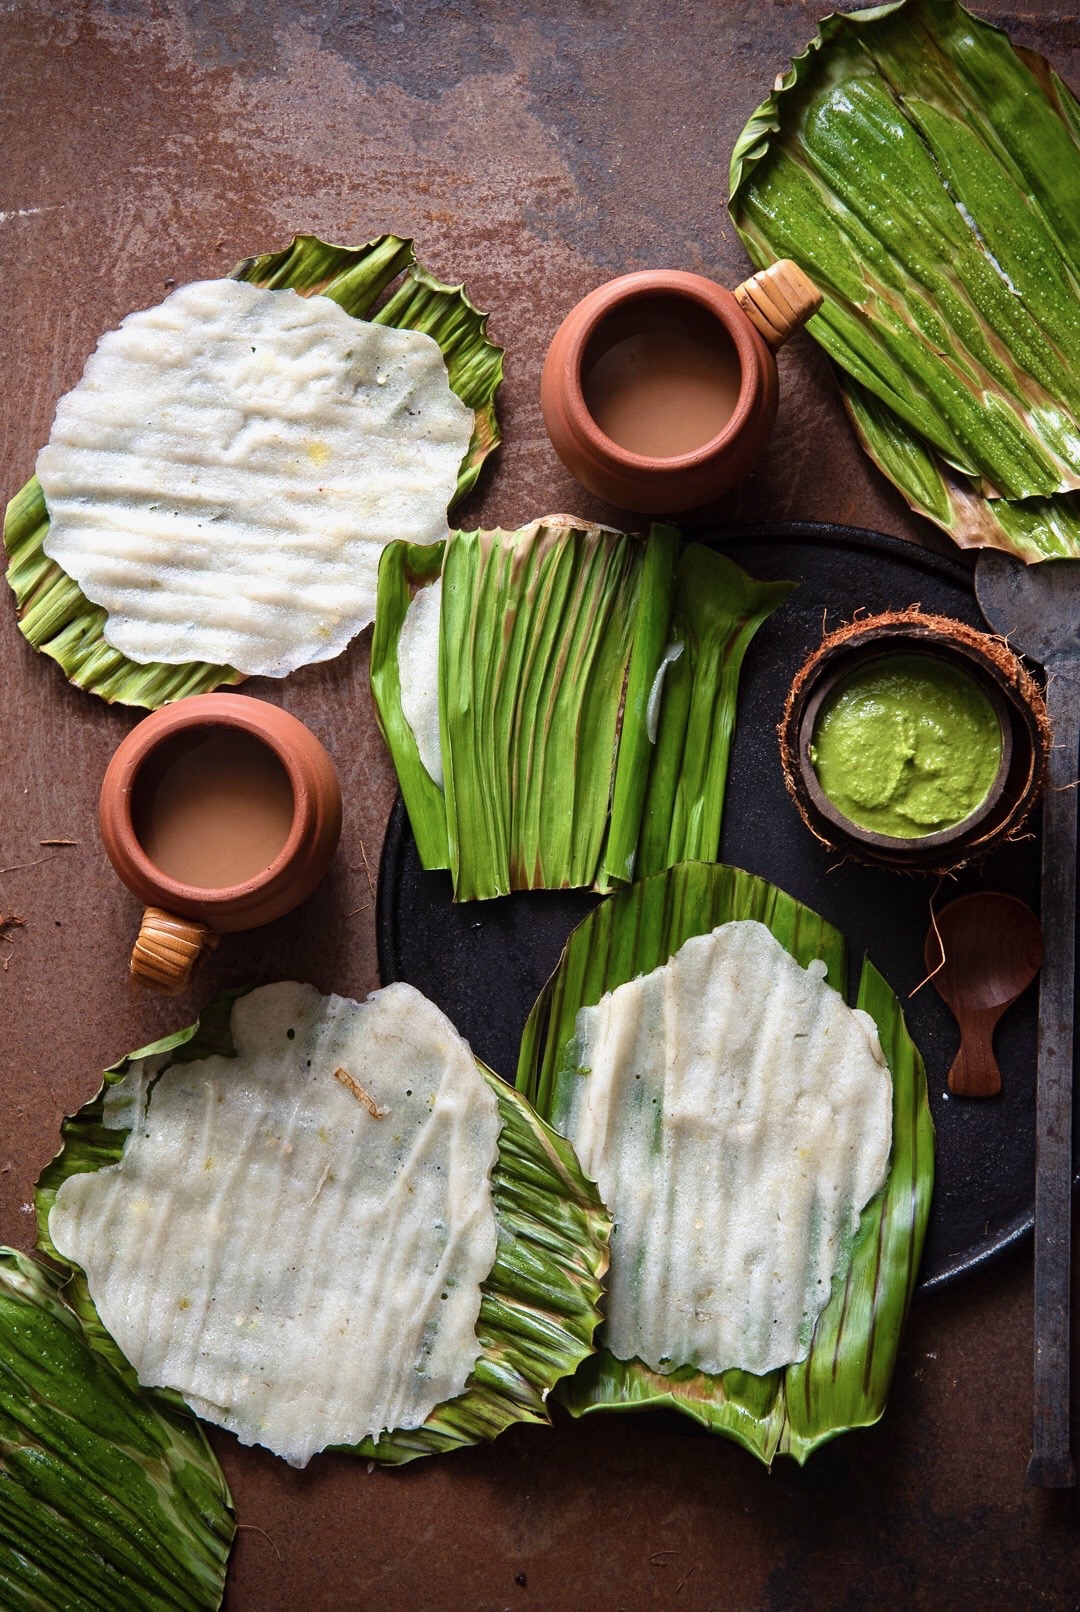 Panki Delicate Rice Flour Crepes Steamed In Banana Leaf Theroute2roots